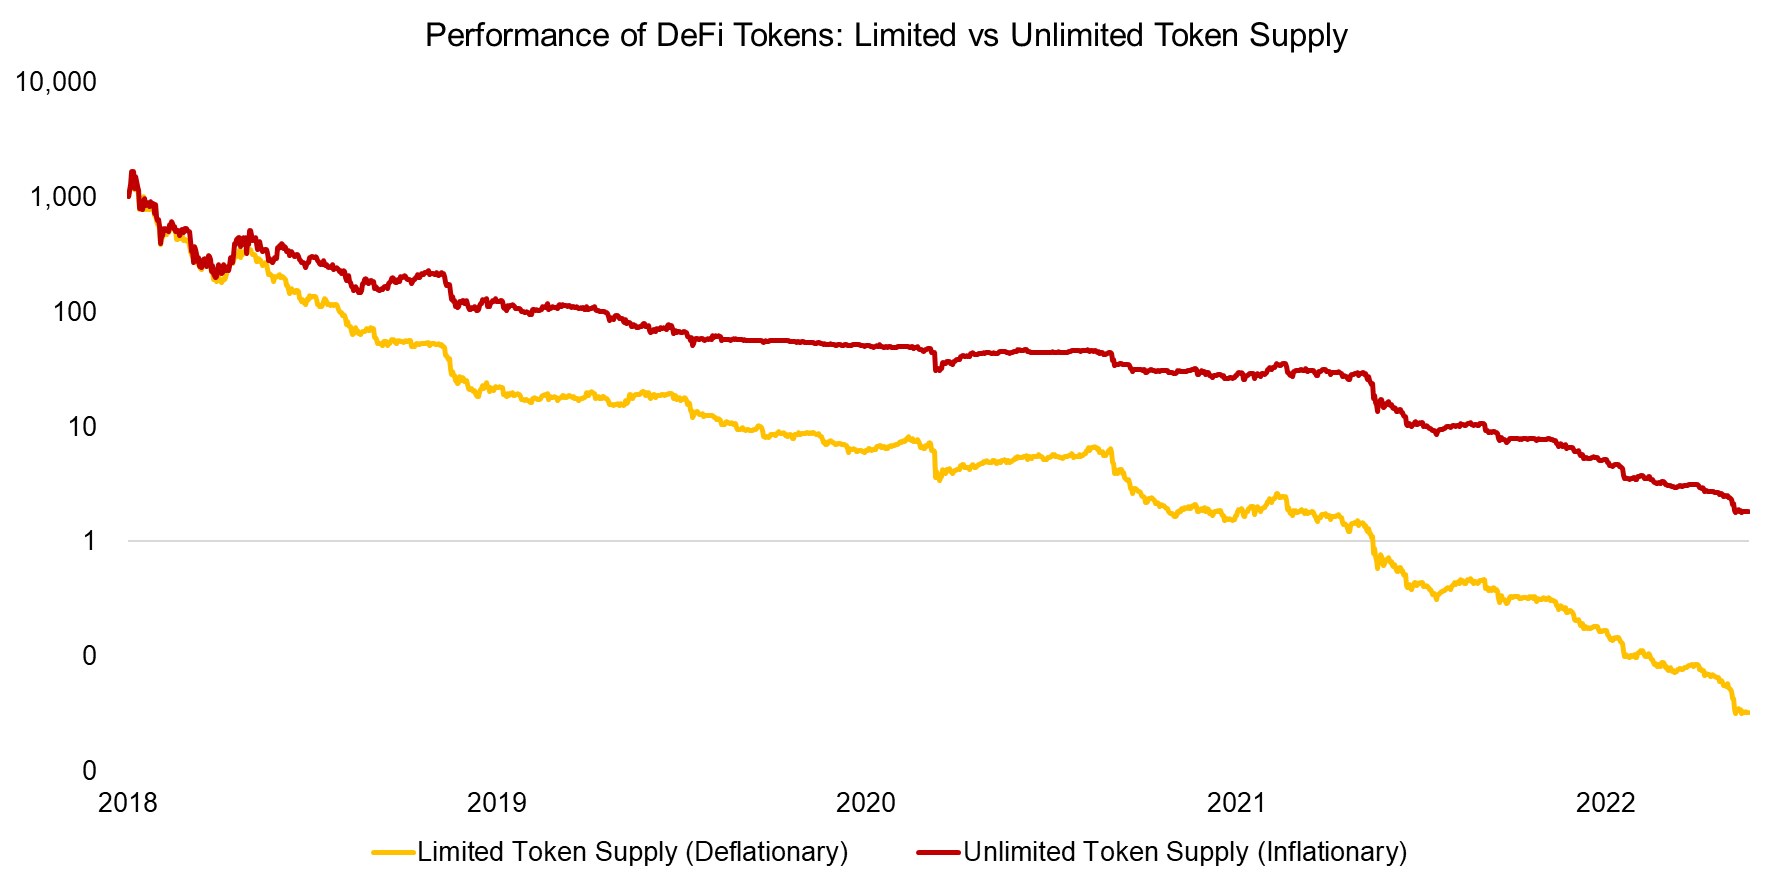 Performance of DeFi Tokens Limited vs Unlimited Token Supply